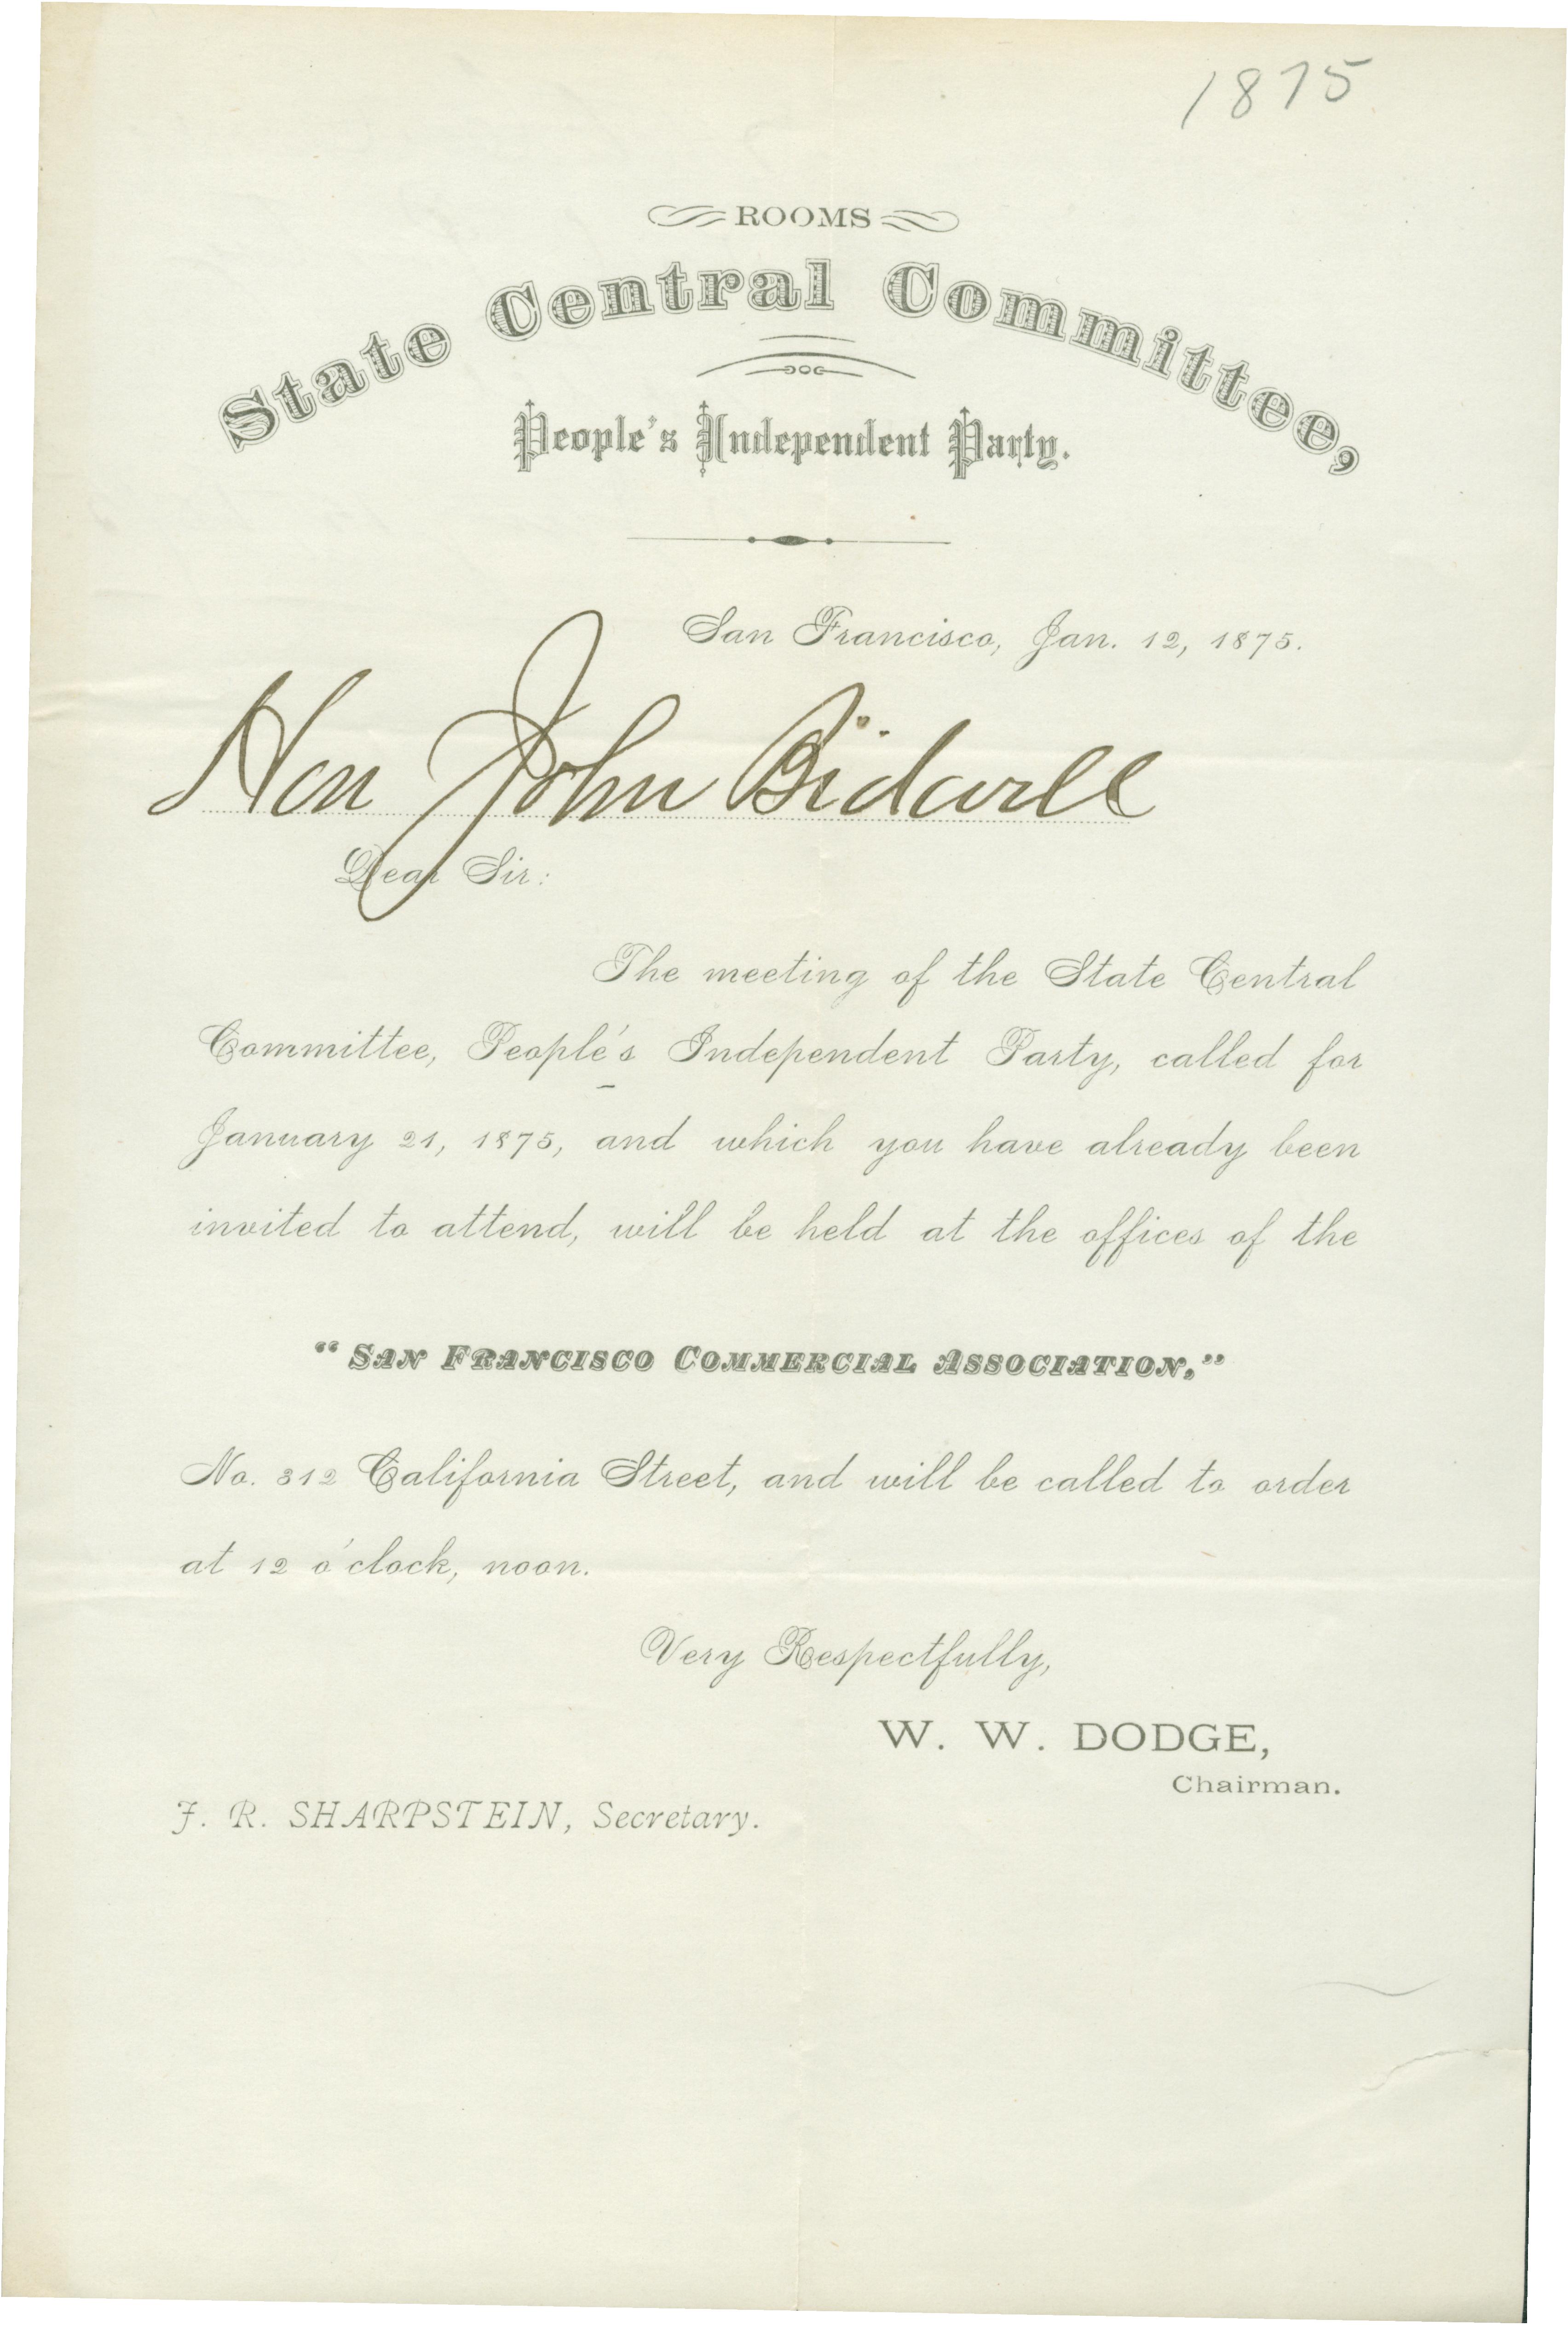 This note addressed to John Bidwell by the People's Independent Party is a notice of the date and address for the Independent Party's central committee meeting.